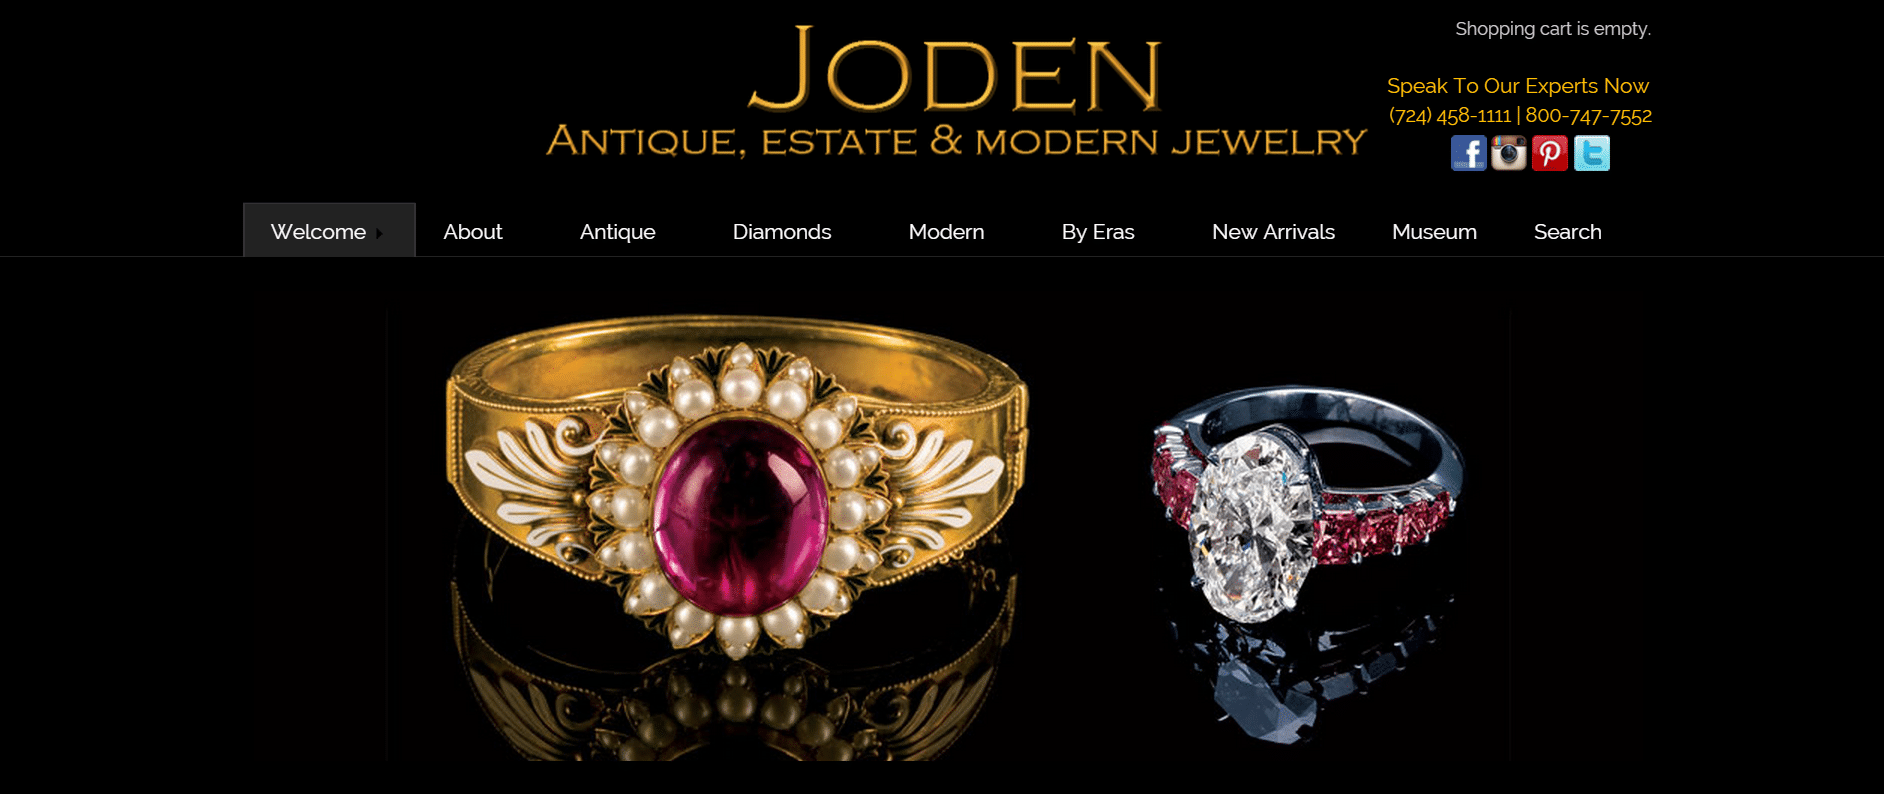 Joden Jewelers  Antique, Estate, and Modern Jewelry